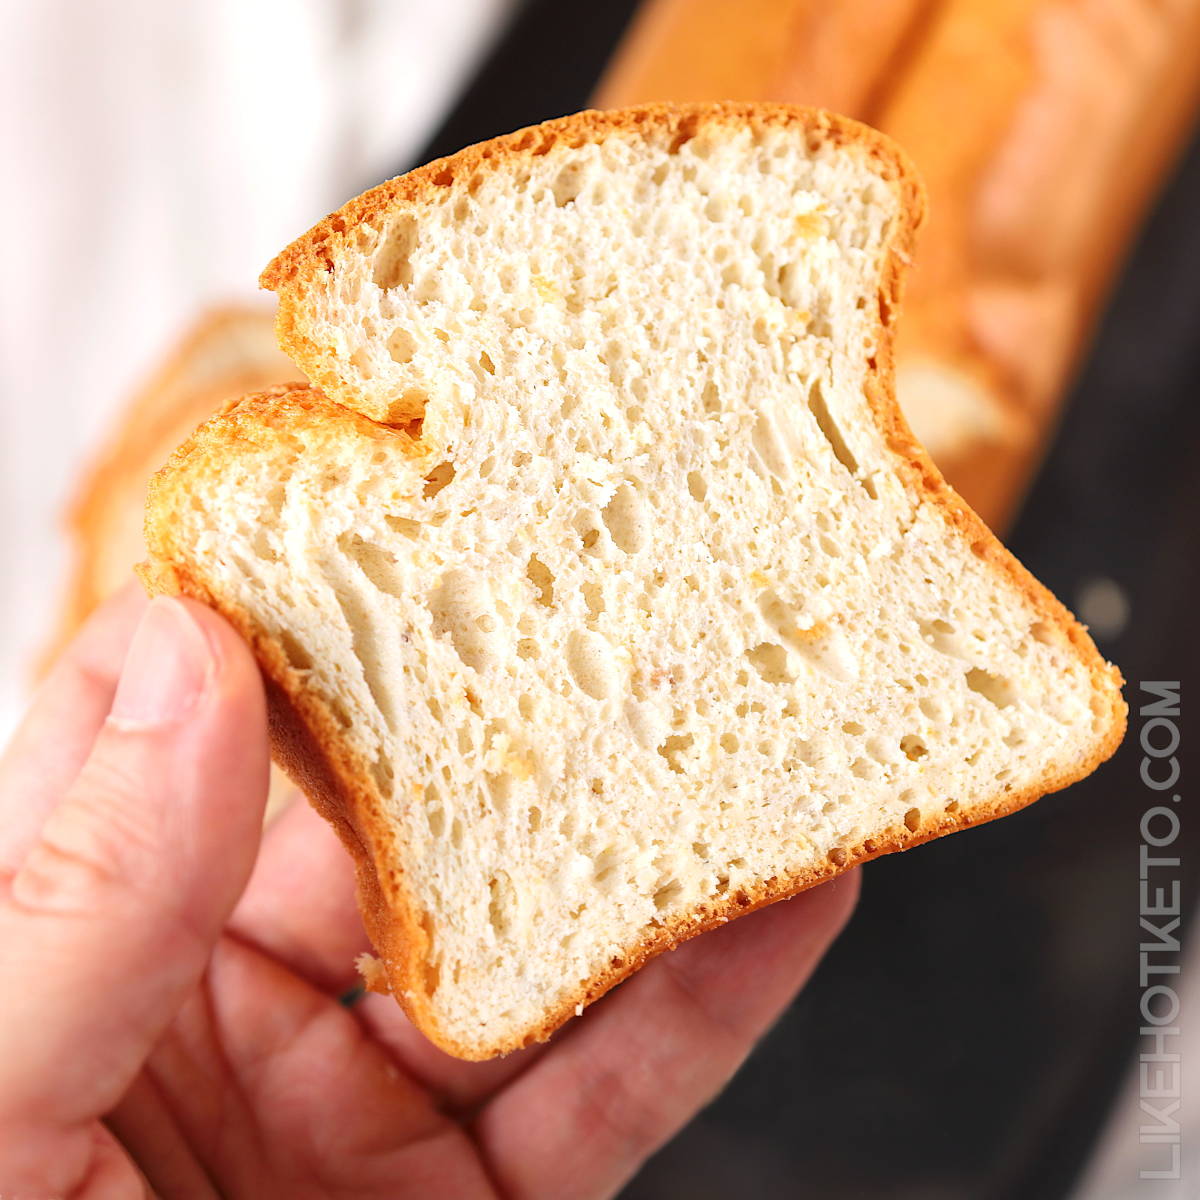 A slice of protein sparing keto bread in hand.